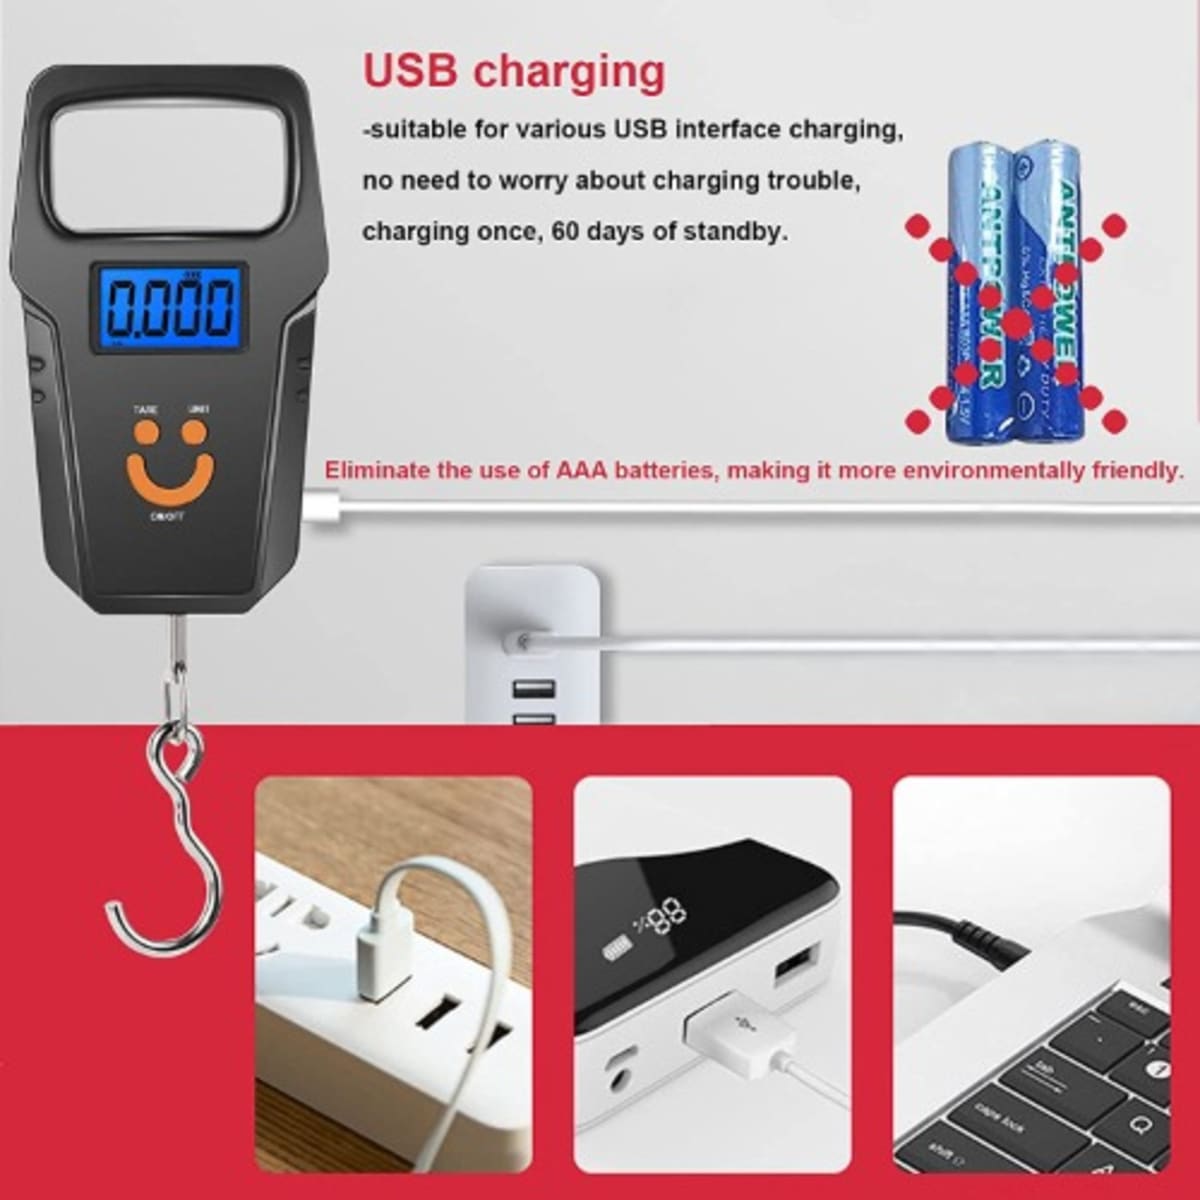 USB Charging Rechargeable Electronic Luggage Scale - 50kg